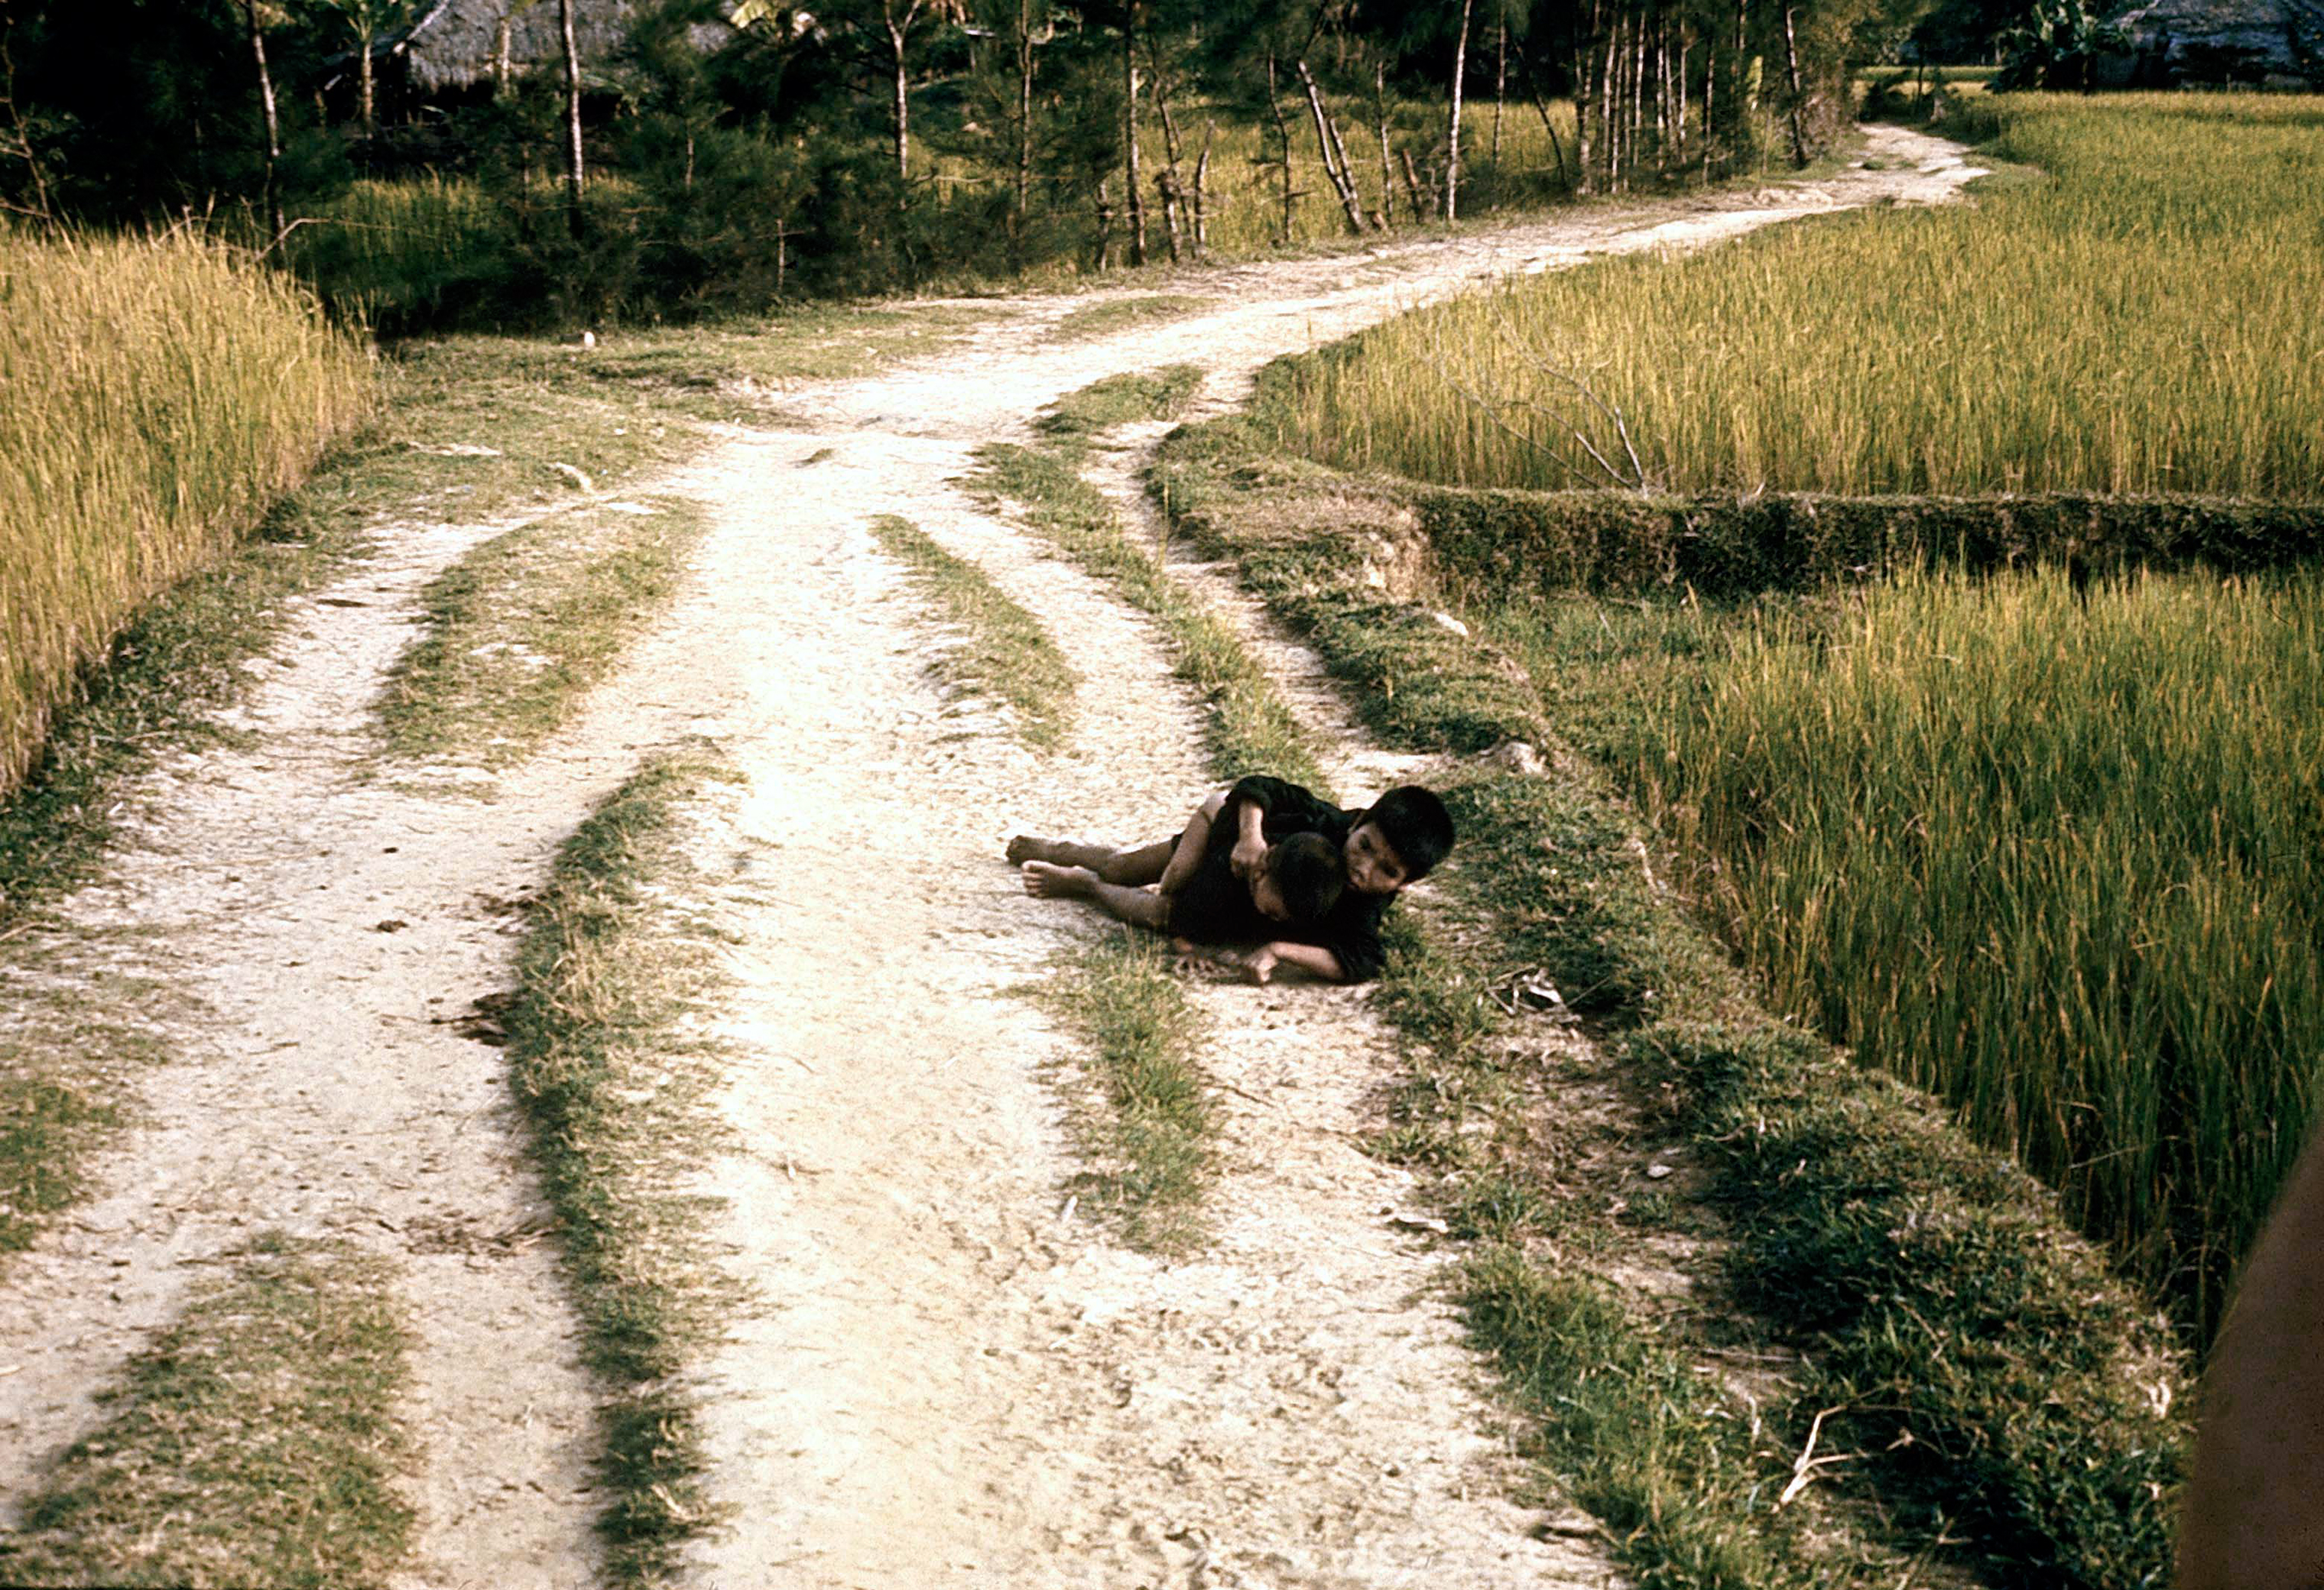 Two Vietnamese children on a road before they were shot by U.S. soldiers on March 16, 1968. (Ronald L. Haeberle—The LIFE Images Collection/Getty Images)